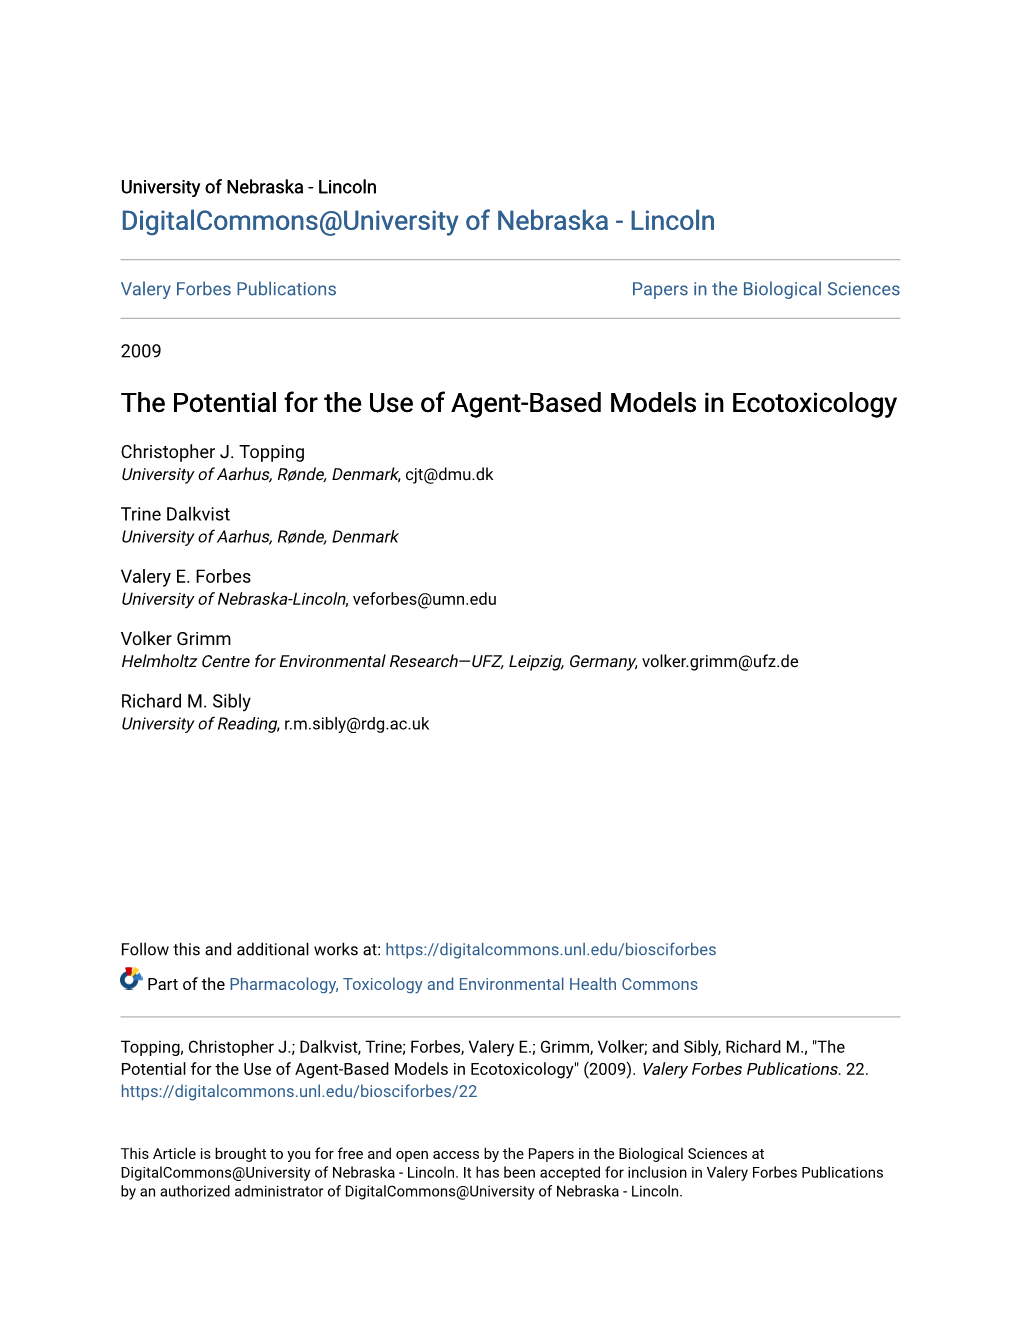 The Potential for the Use of Agent-Based Models in Ecotoxicology